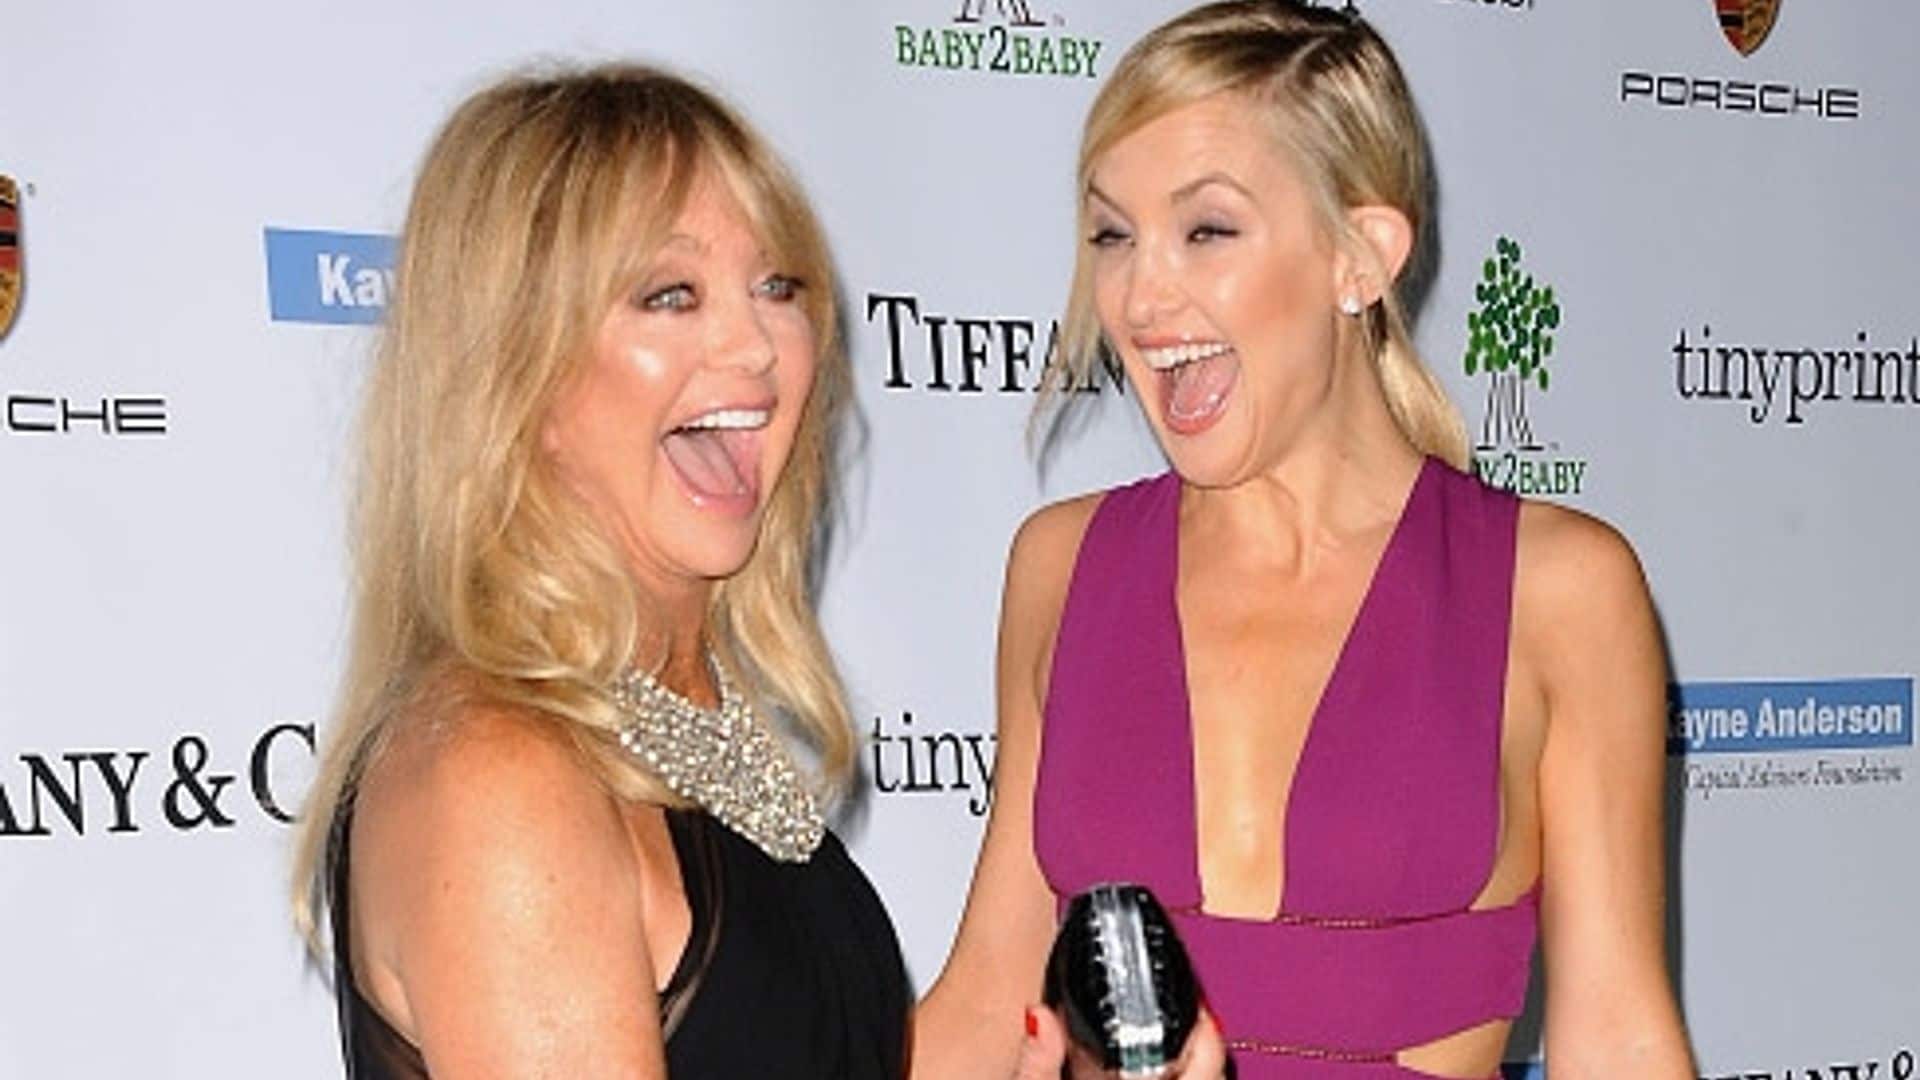 Kate Hudson and mom Goldie Hawn shine on the red carpet